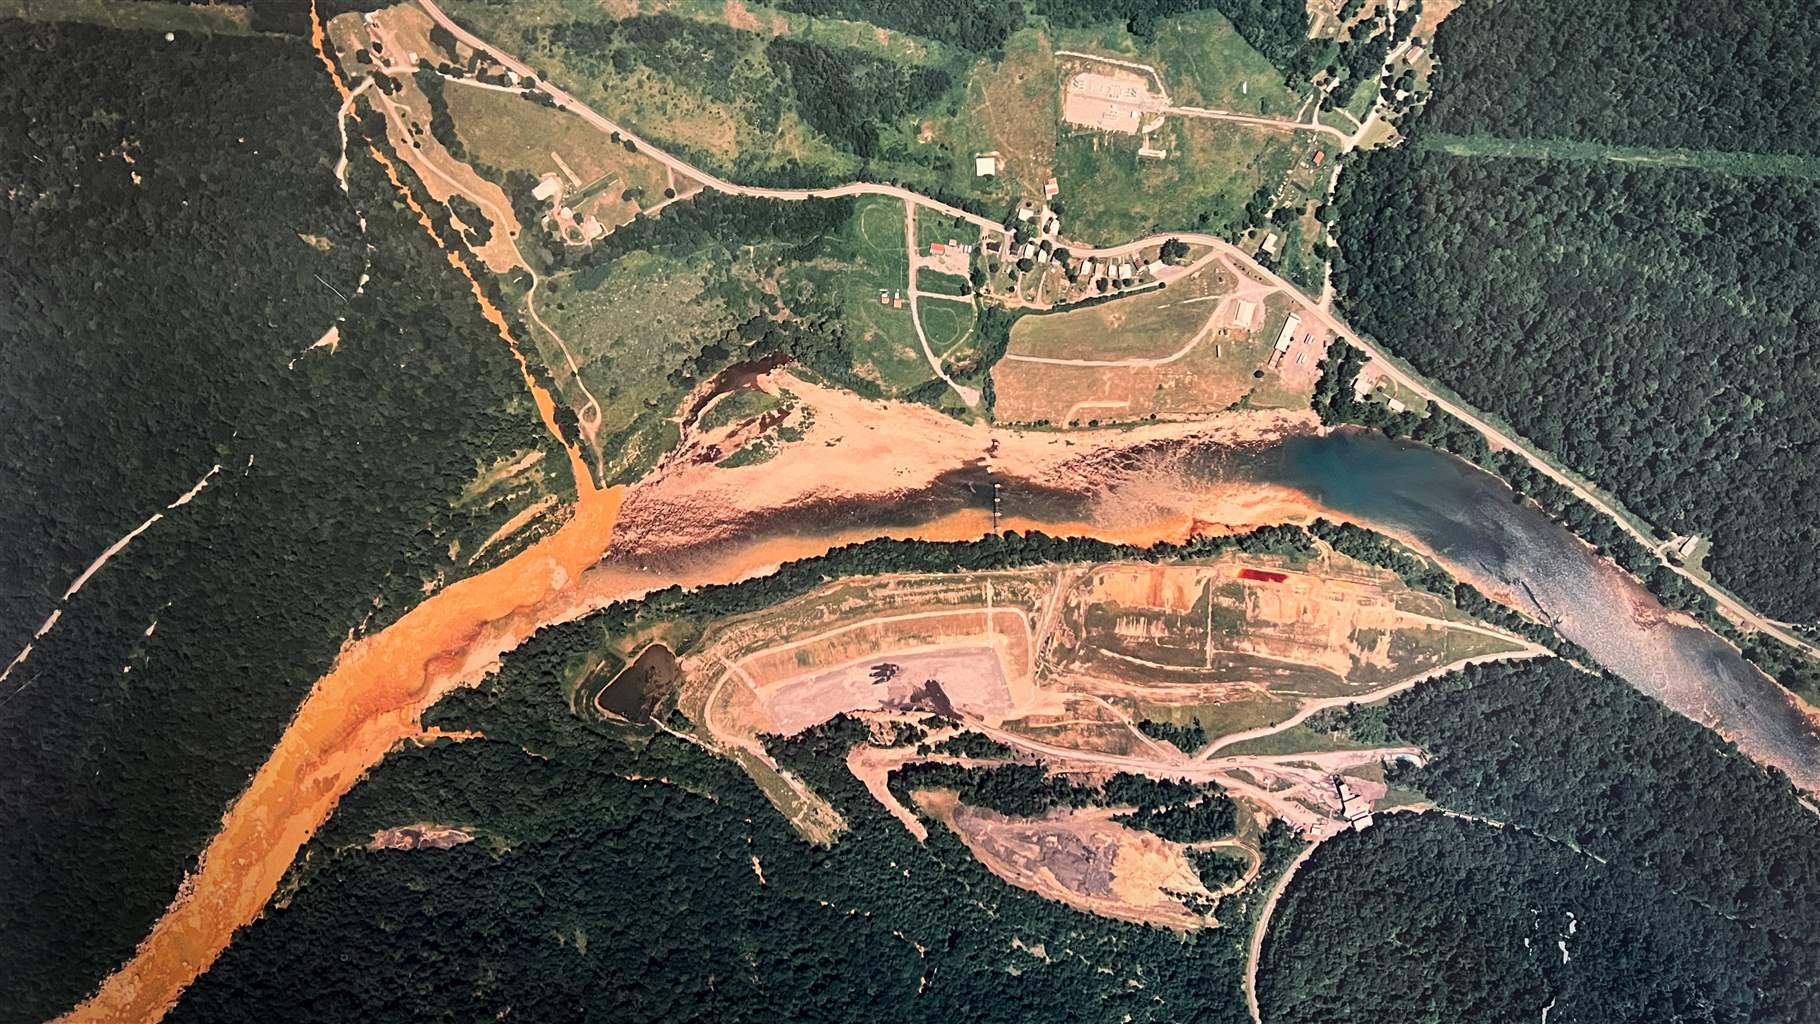 The Cheat River flows orange following a 1994 blowout of a coal mine just upstream from Cheat Canyon. 